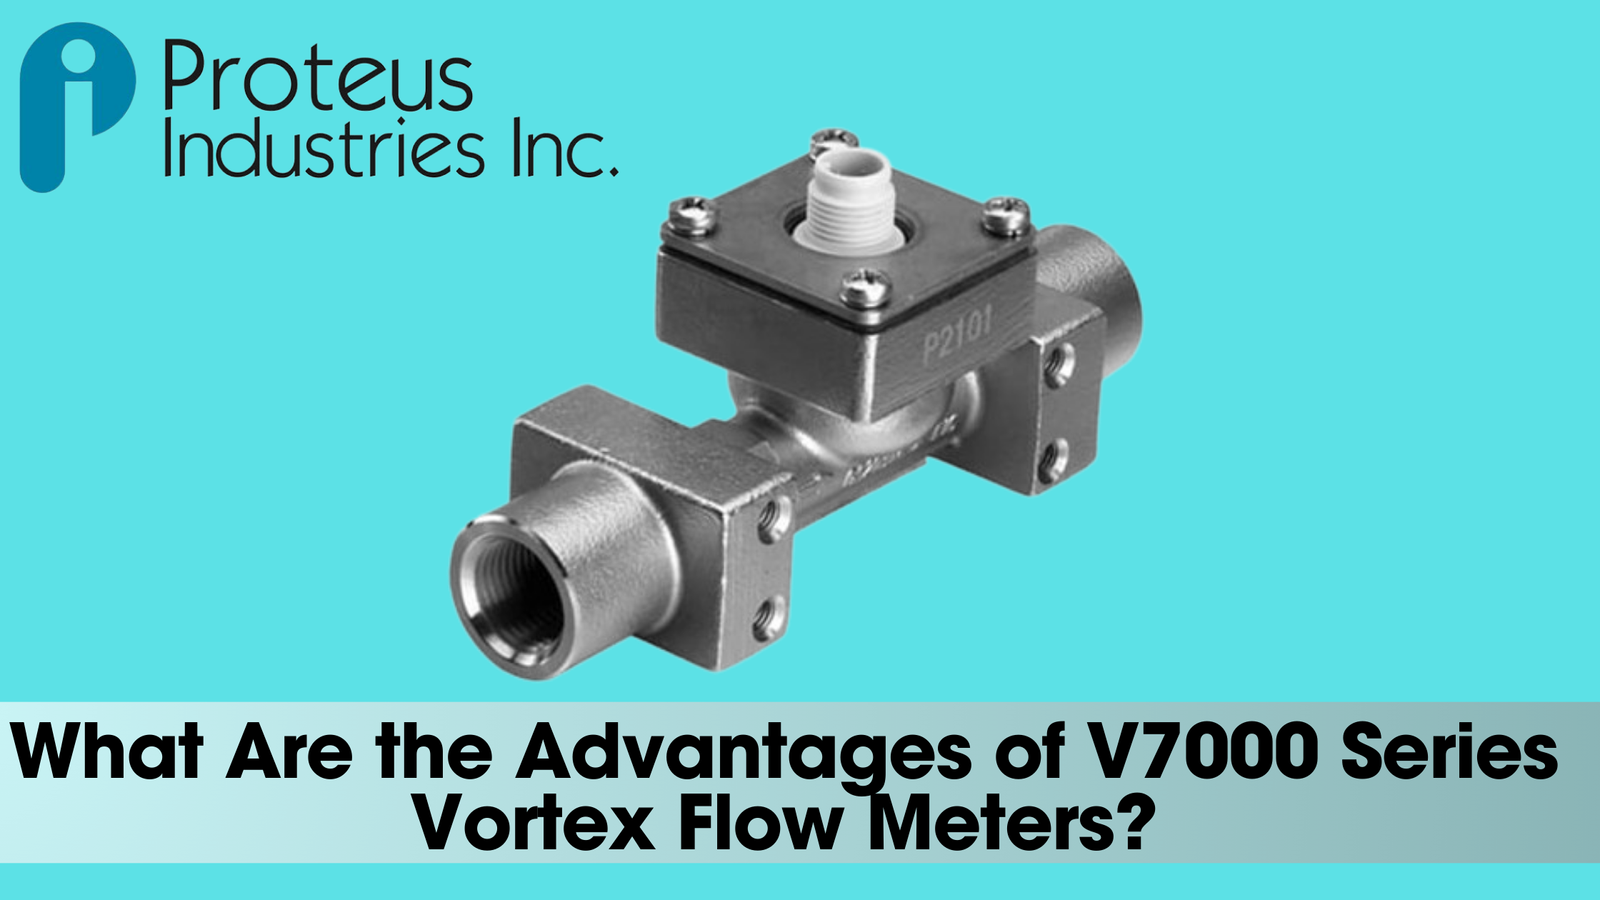 What Are the Advantages of V7000 Series Vortex Flow Meters?